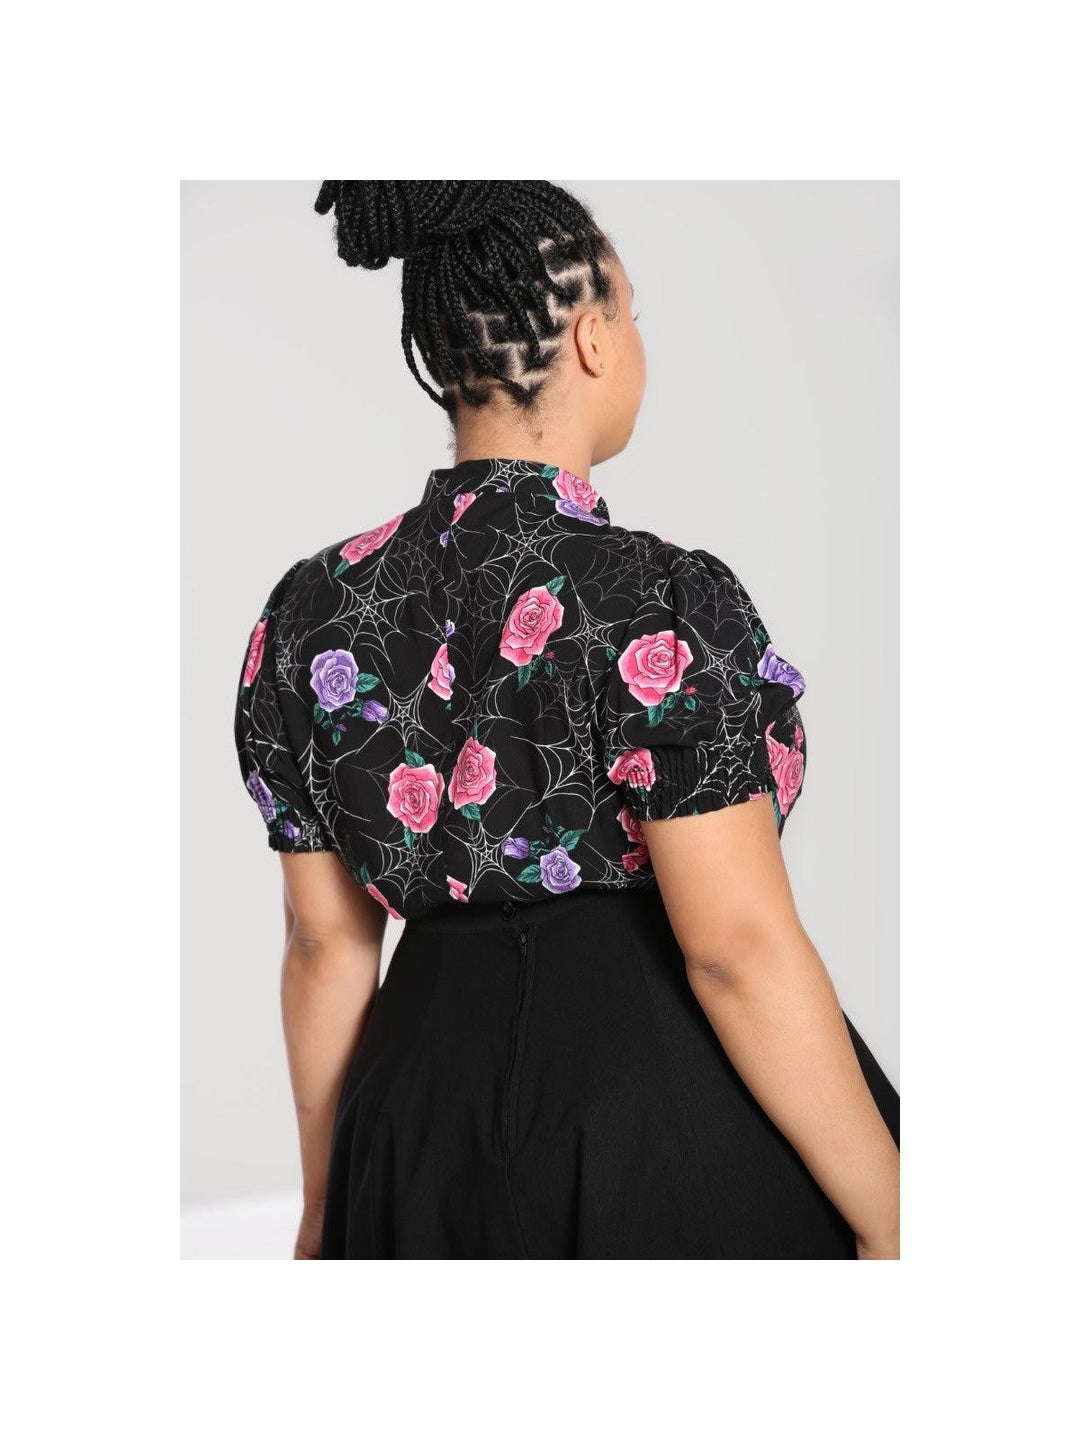 HELL BUNNY Eloise Spider Blouse